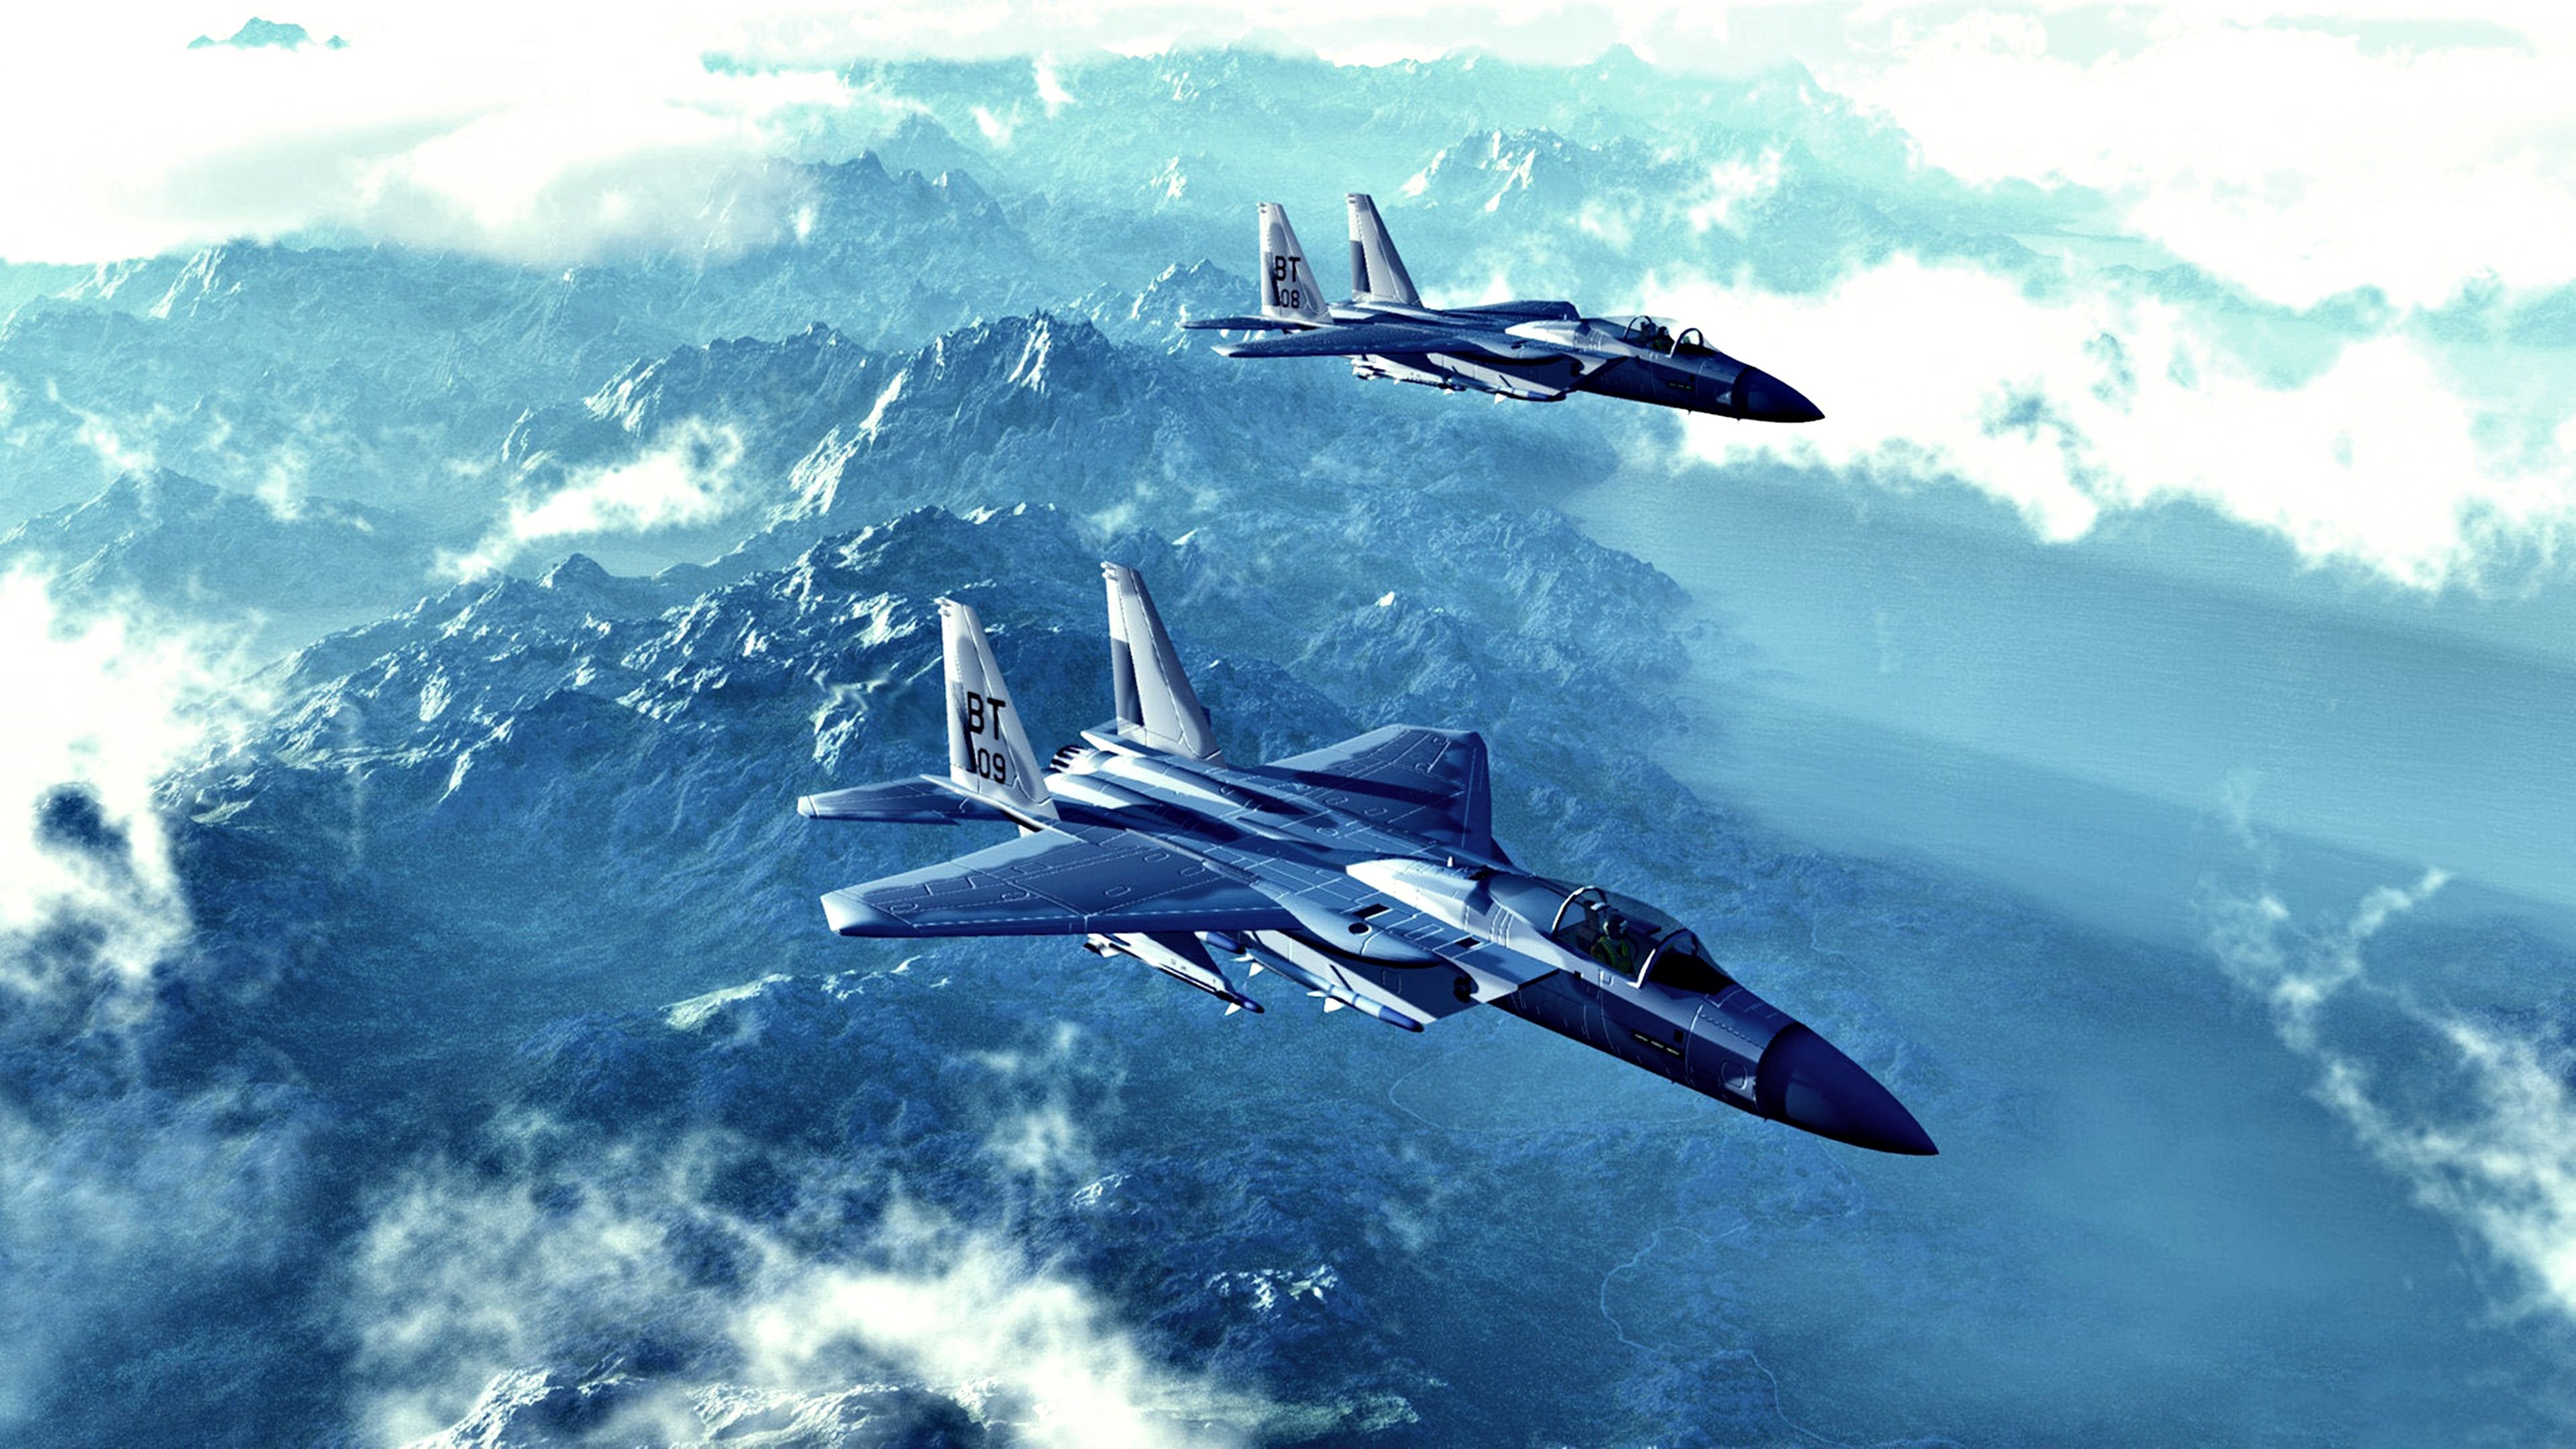 mcdonnell, Douglas, F 15, Eagle, Aircraft, Bombs, Fighter, Flight, Military, Missiles, Shells, Mountains, Clouds, Landscapes Wallpaper